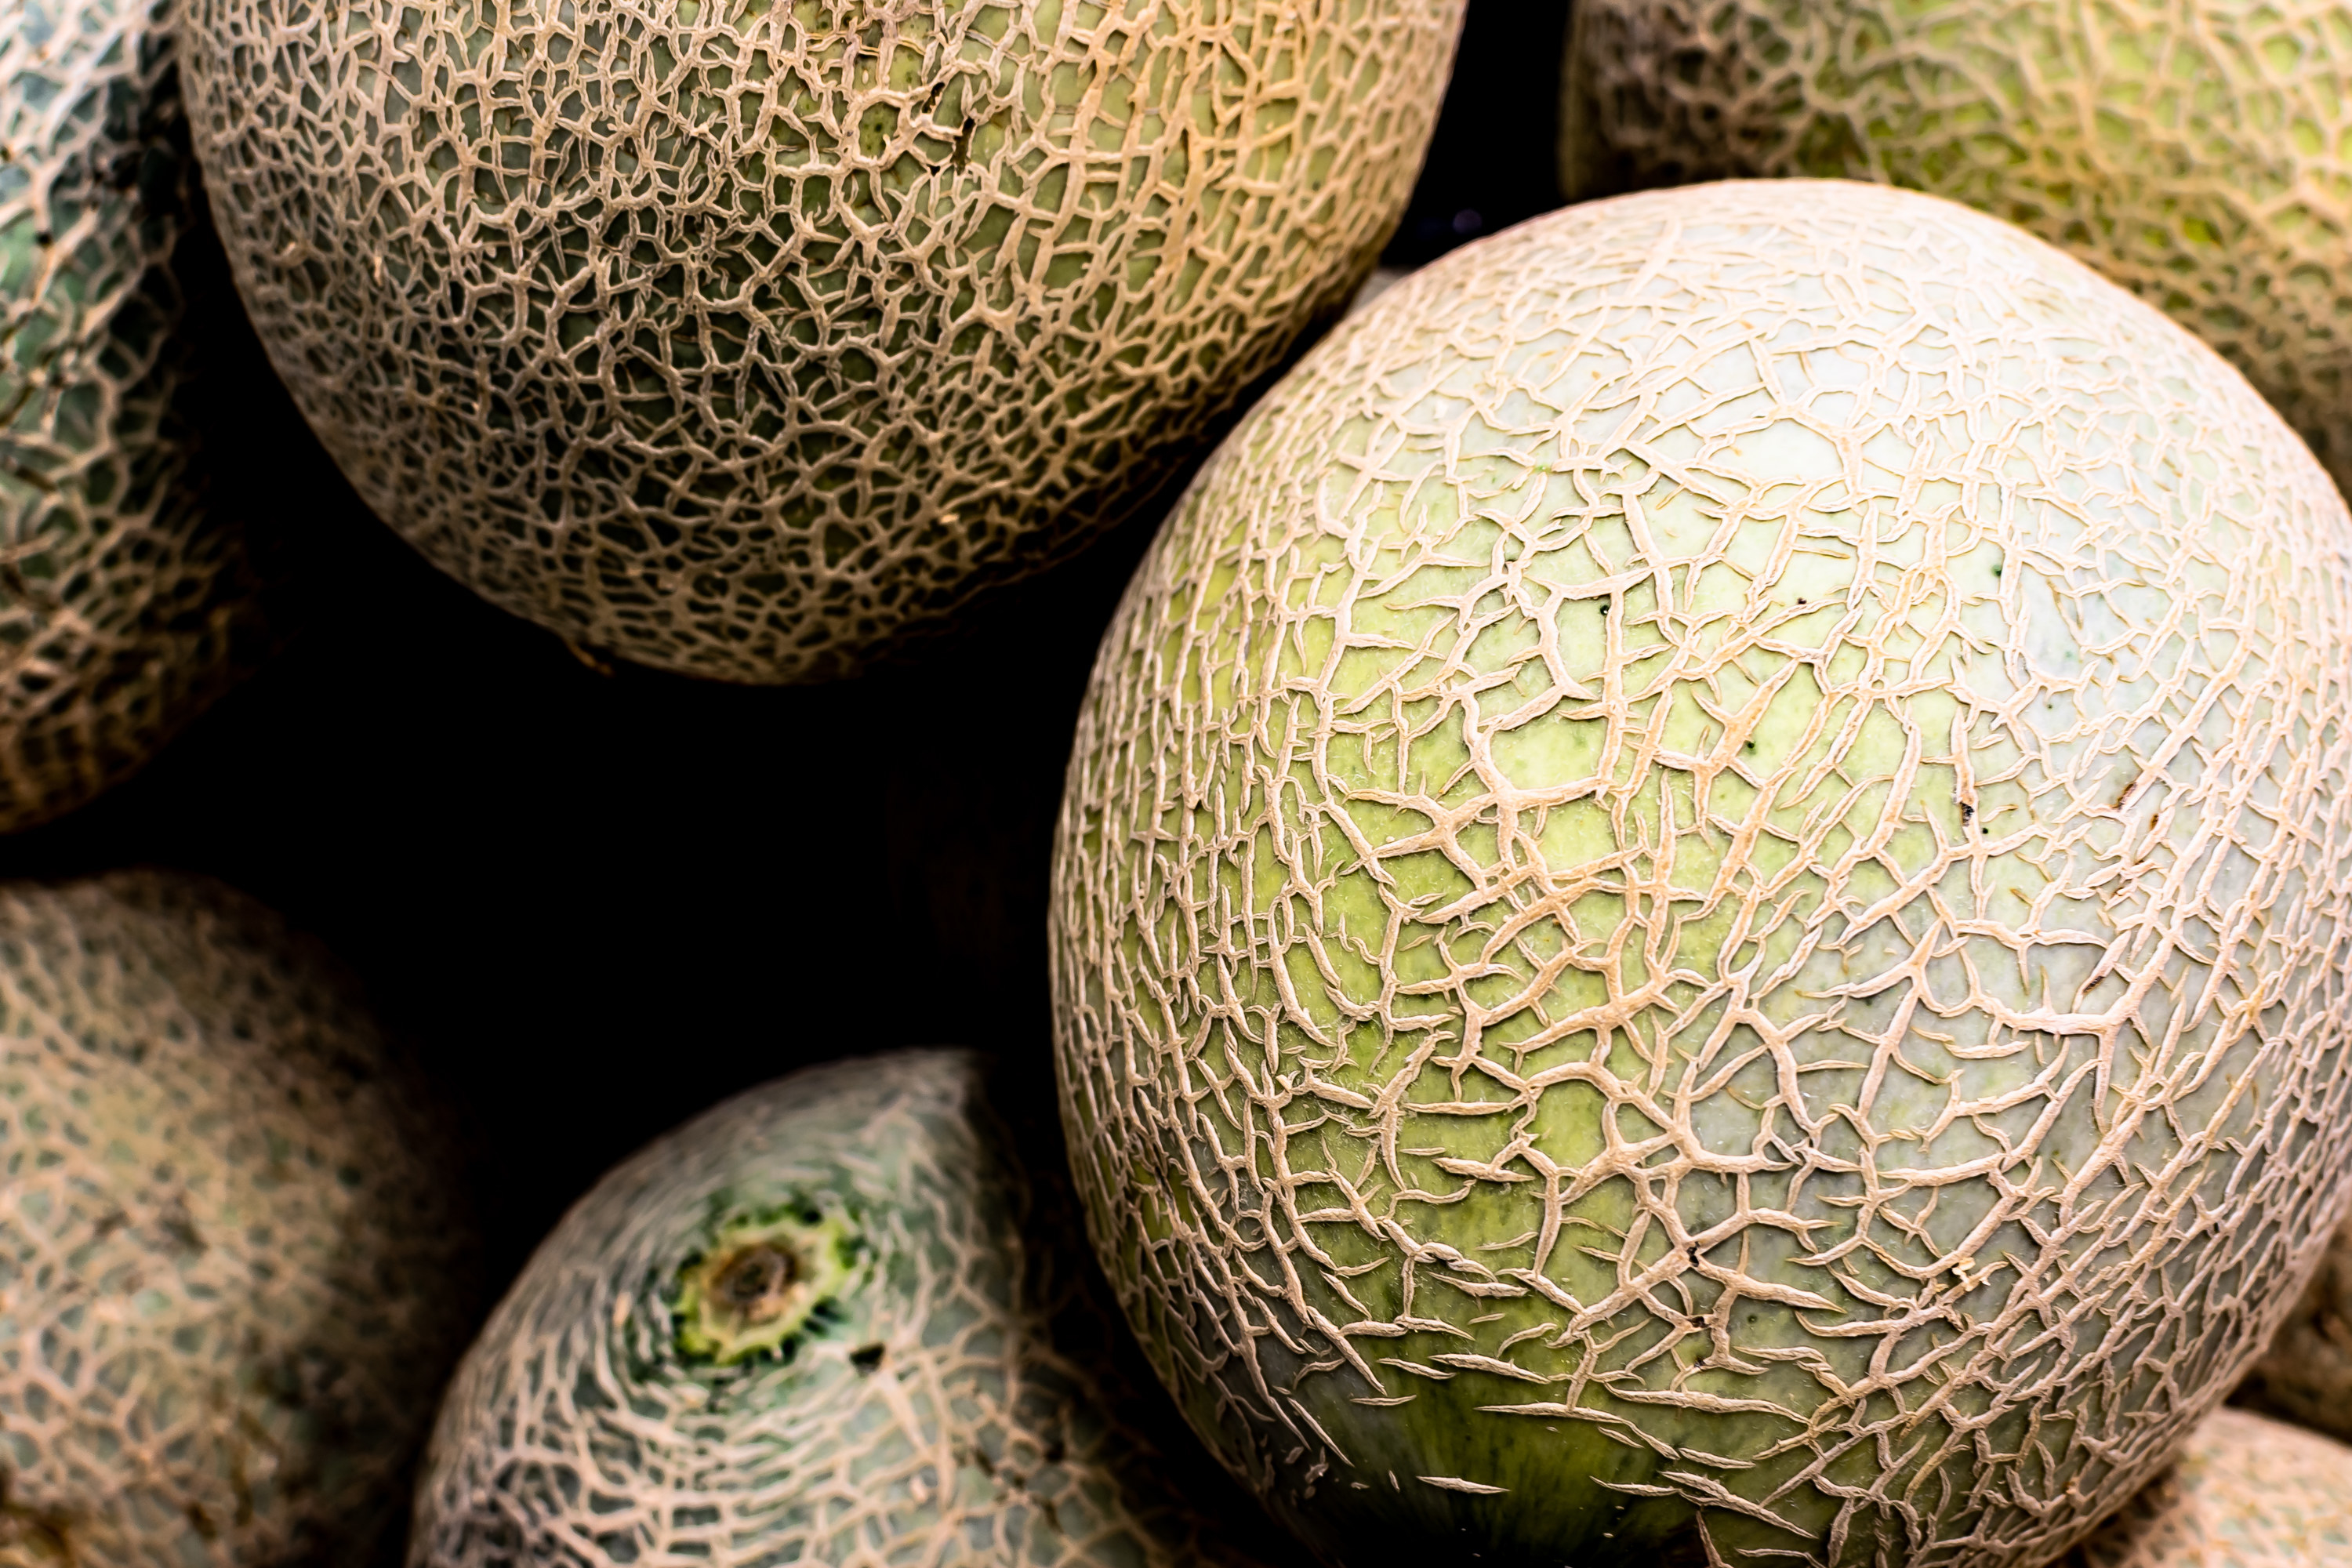 Canteloupe melons